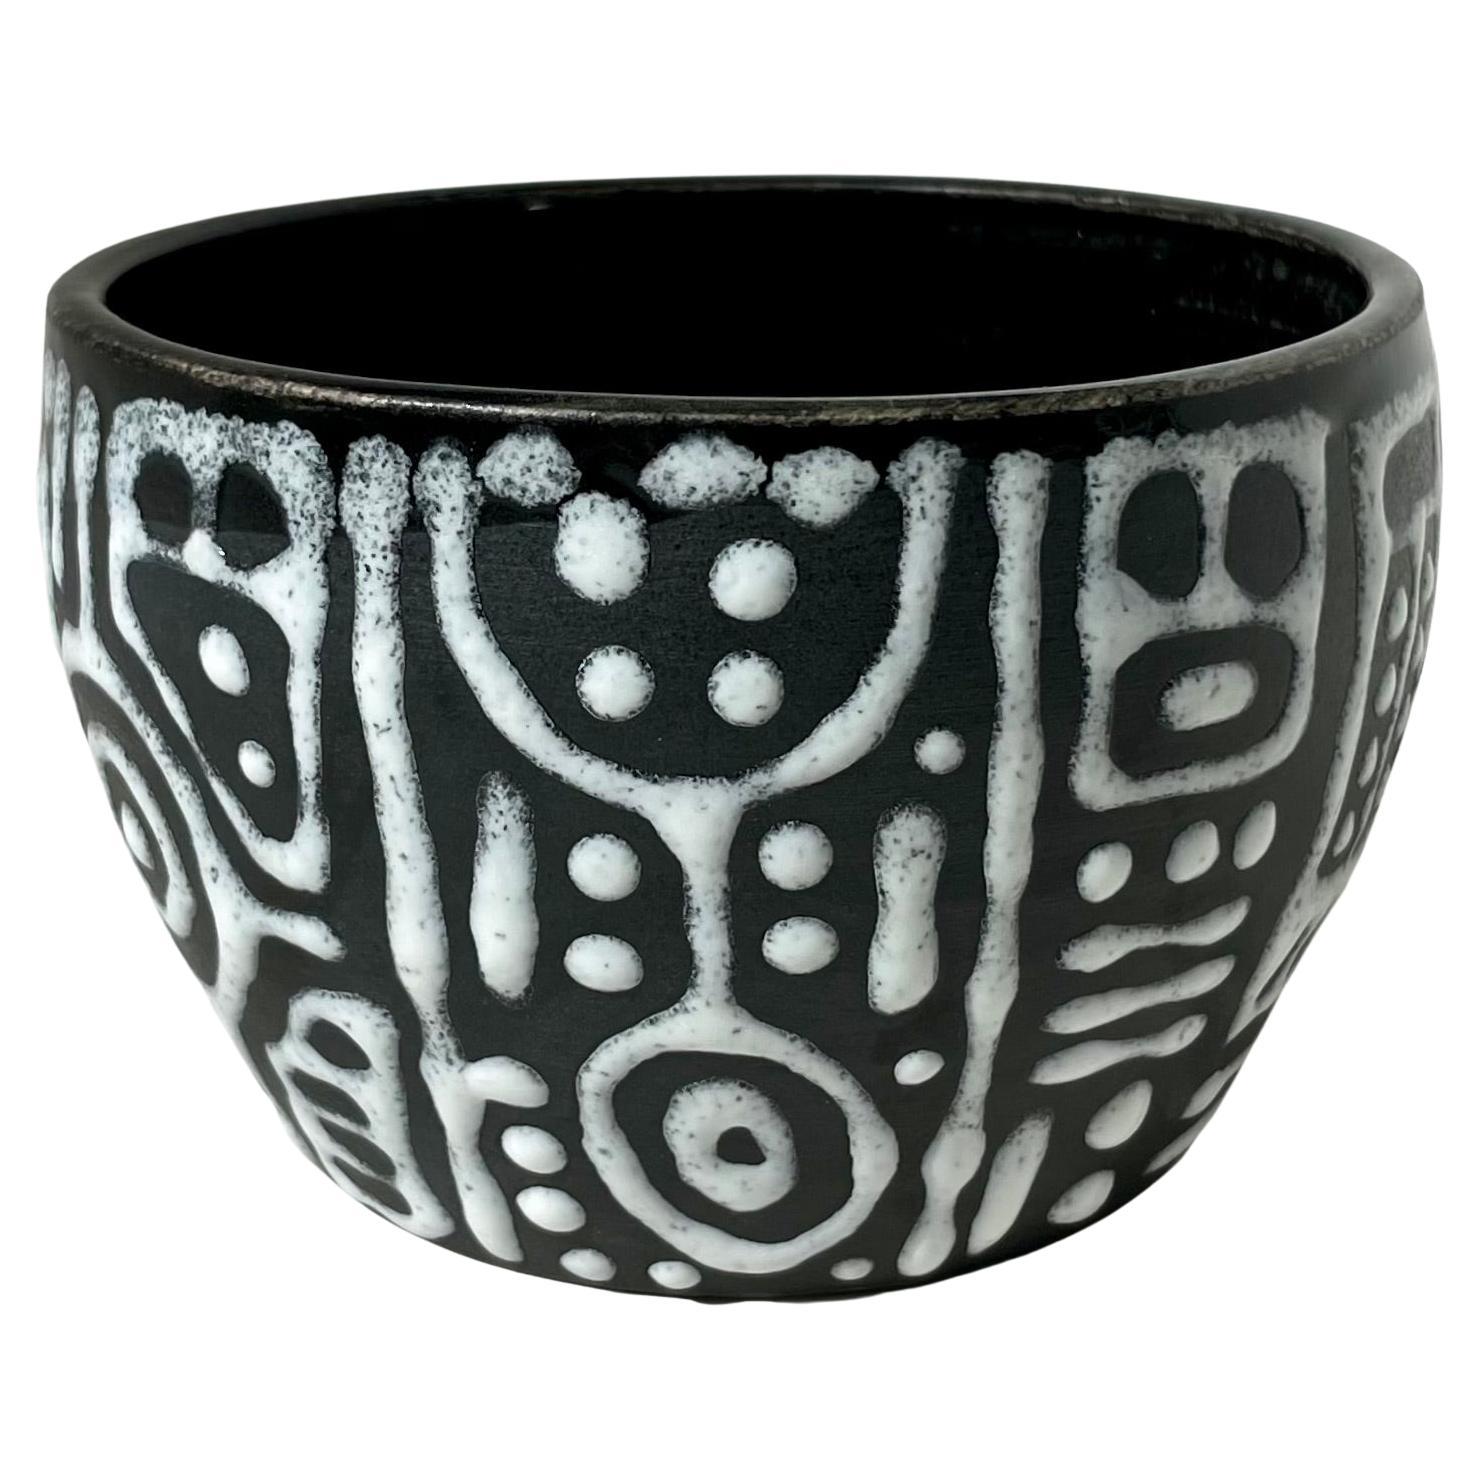 La Mola Tumbler, Handmade and Food Safe, by Artist Stef Duffy